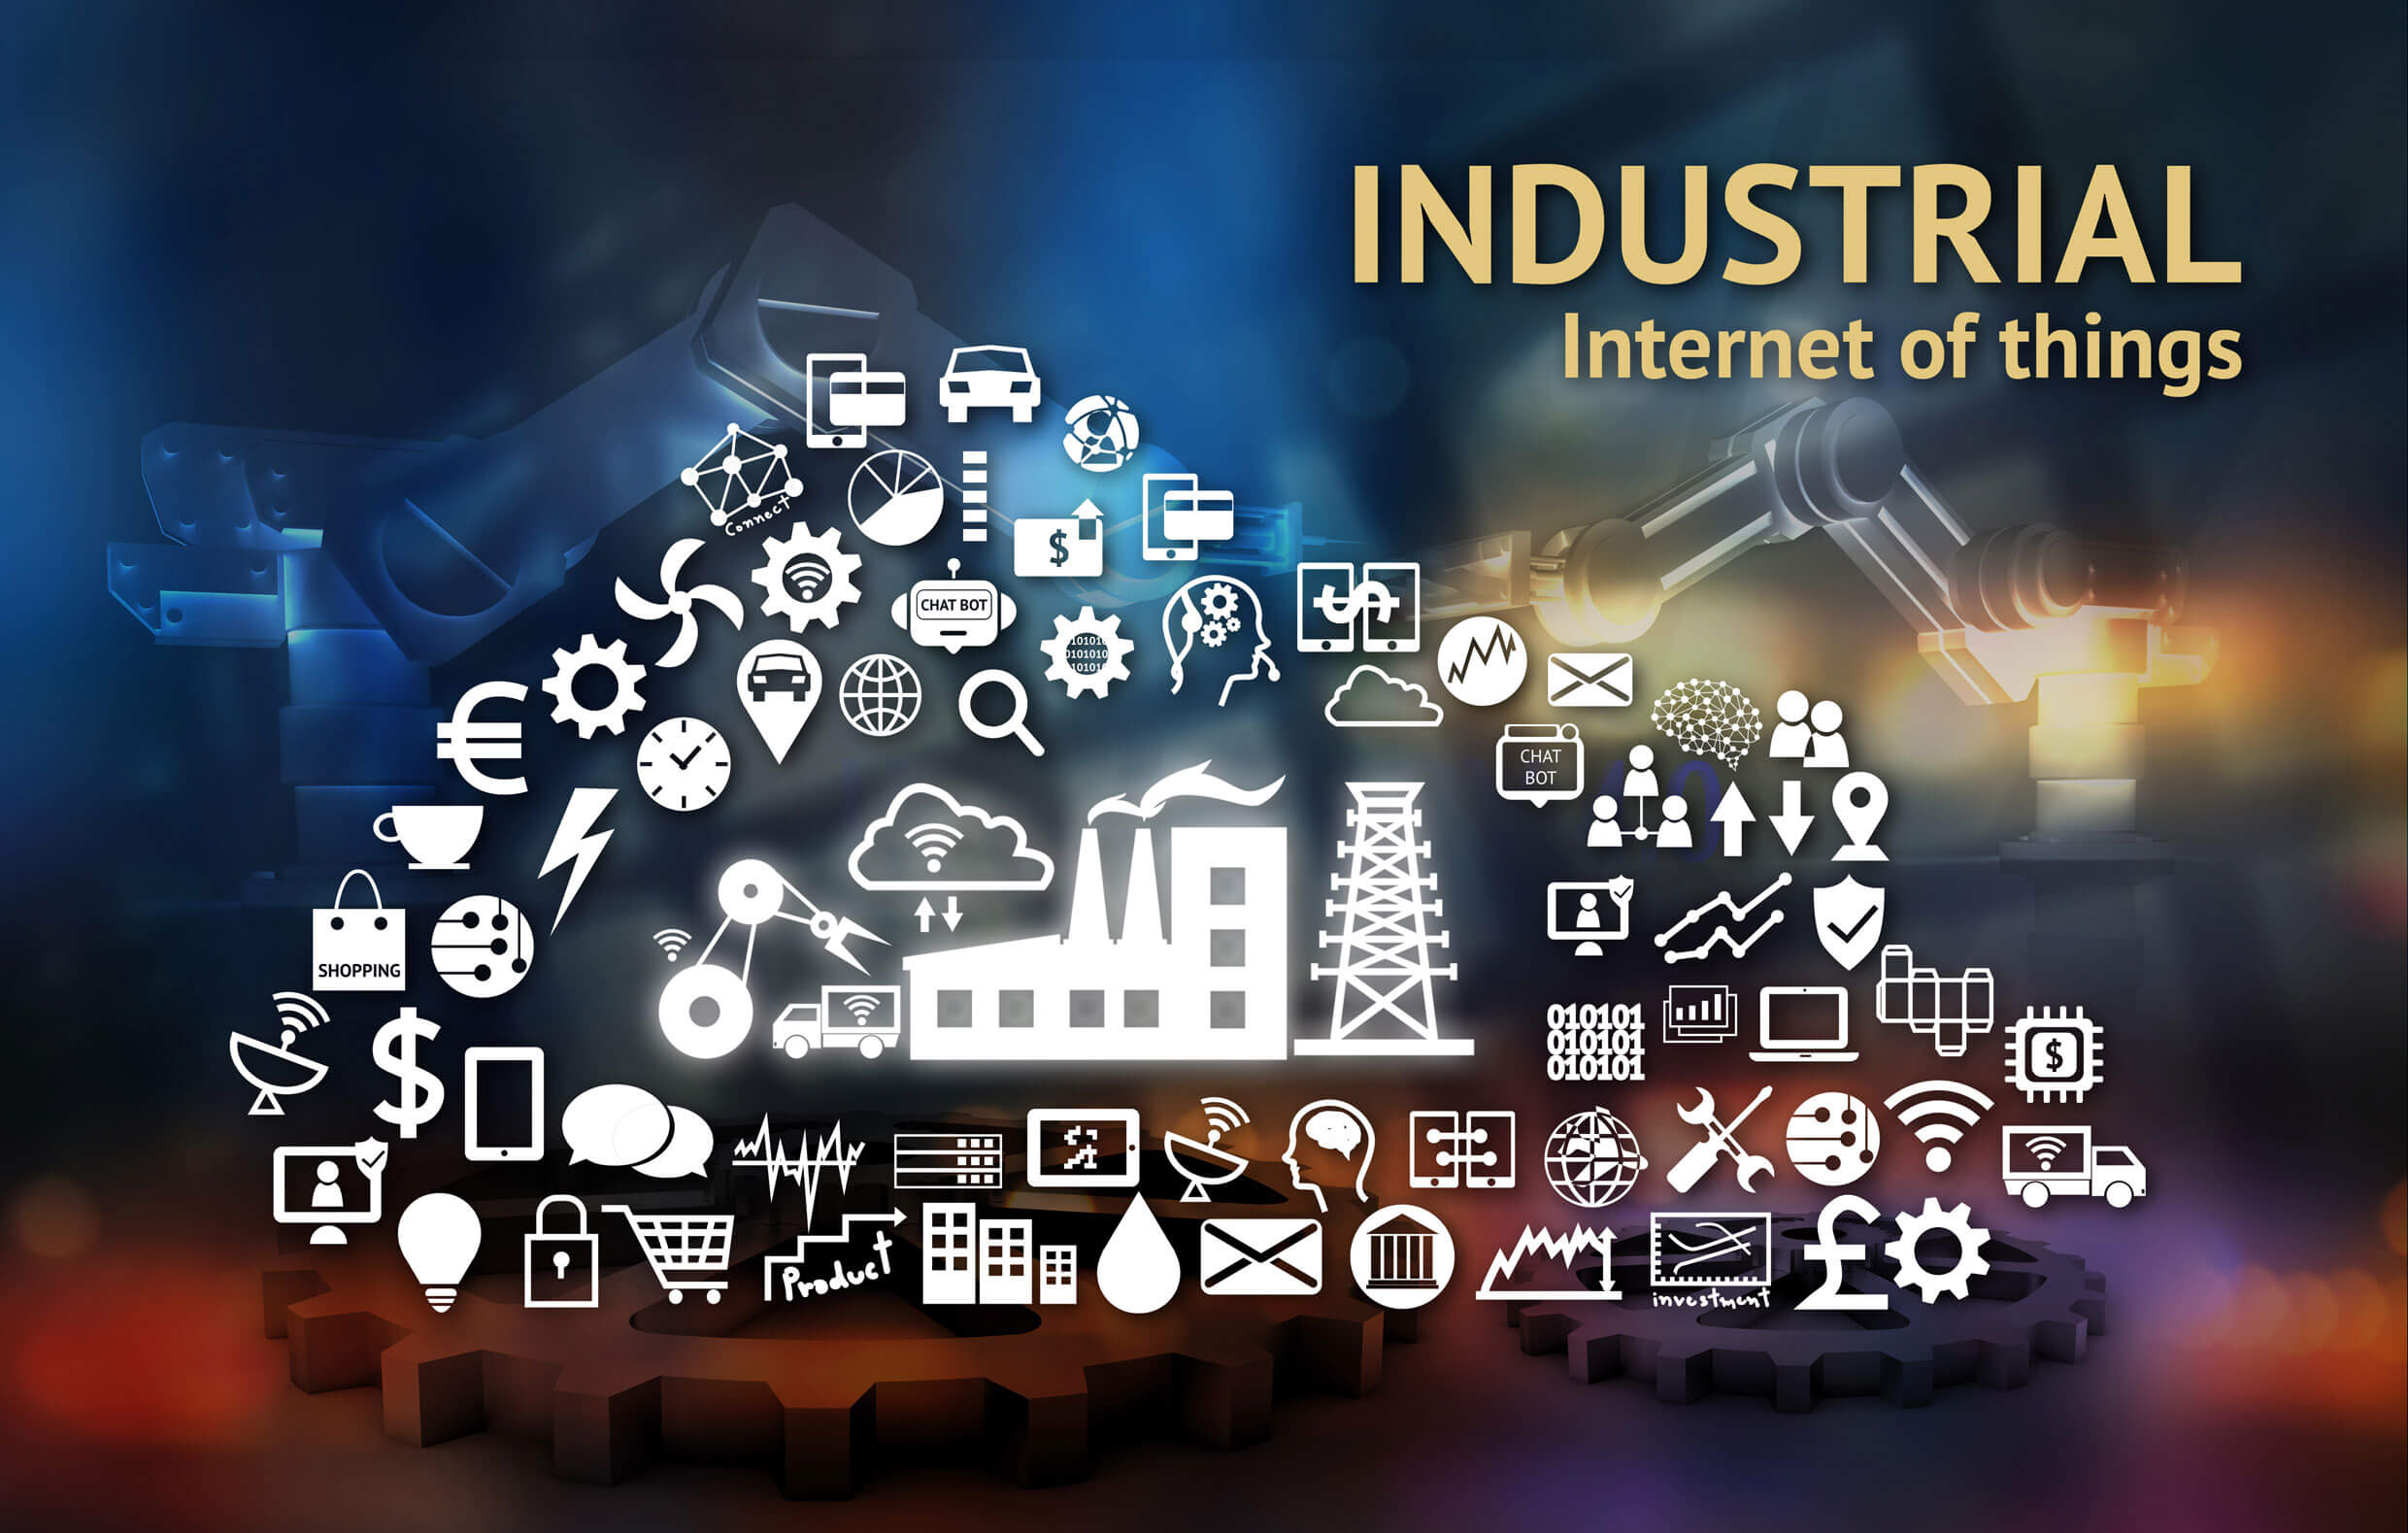 The Industrial Internet of Things